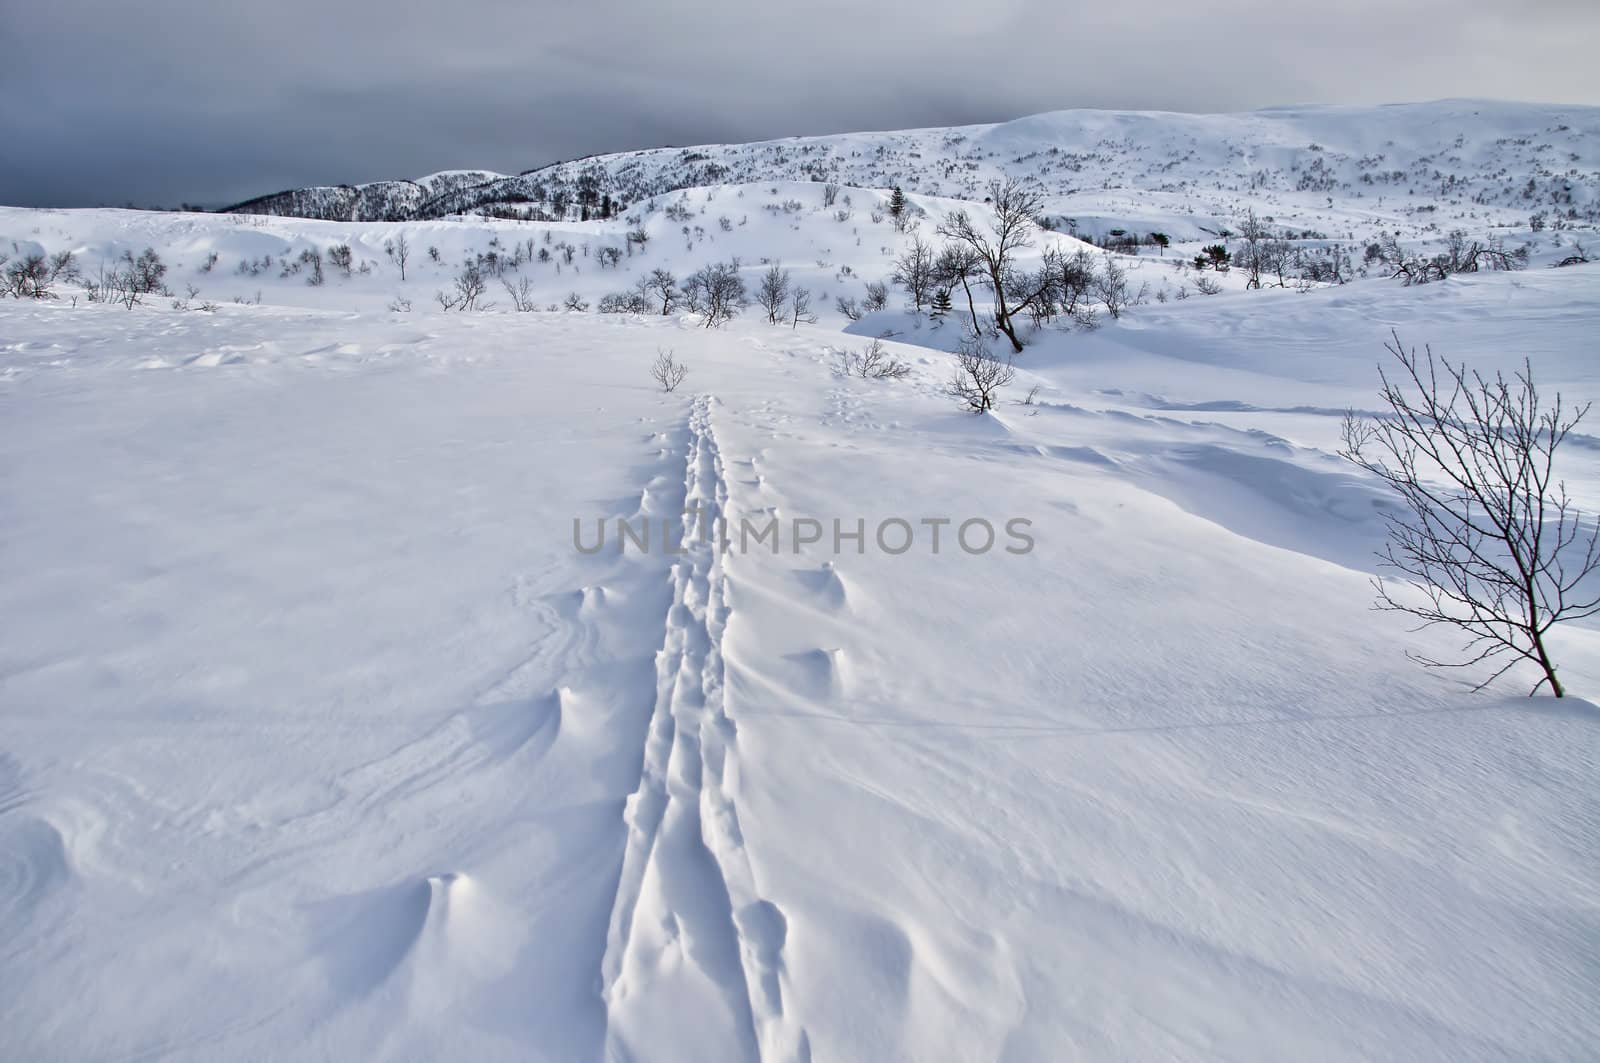 Ski track in the mountains by GryT